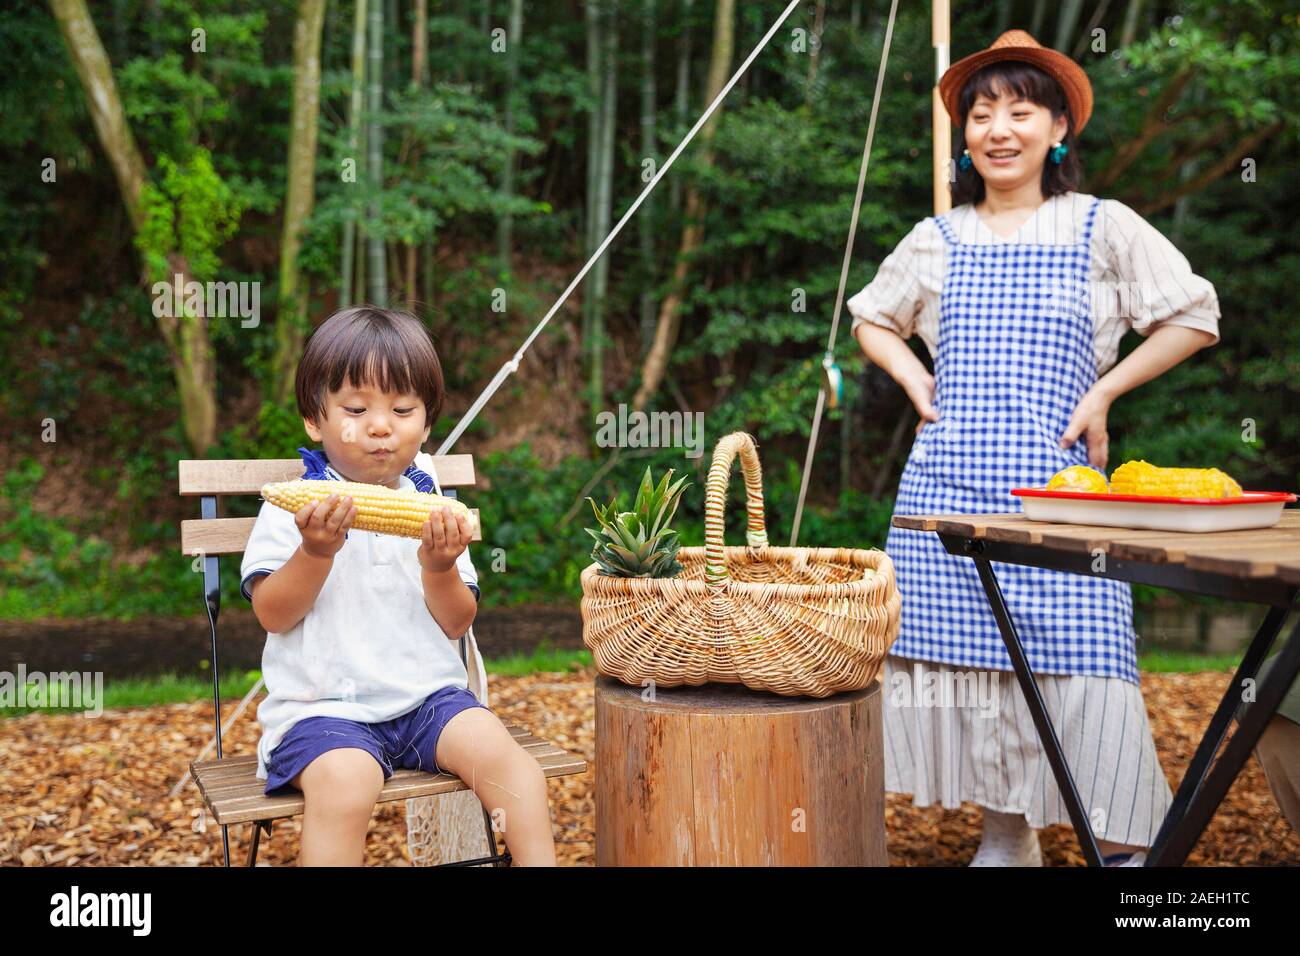 Japanese woman standing outdoors, wearing hat and apron and young boy sitting on chair, eating corn on the cob. Stock Photo